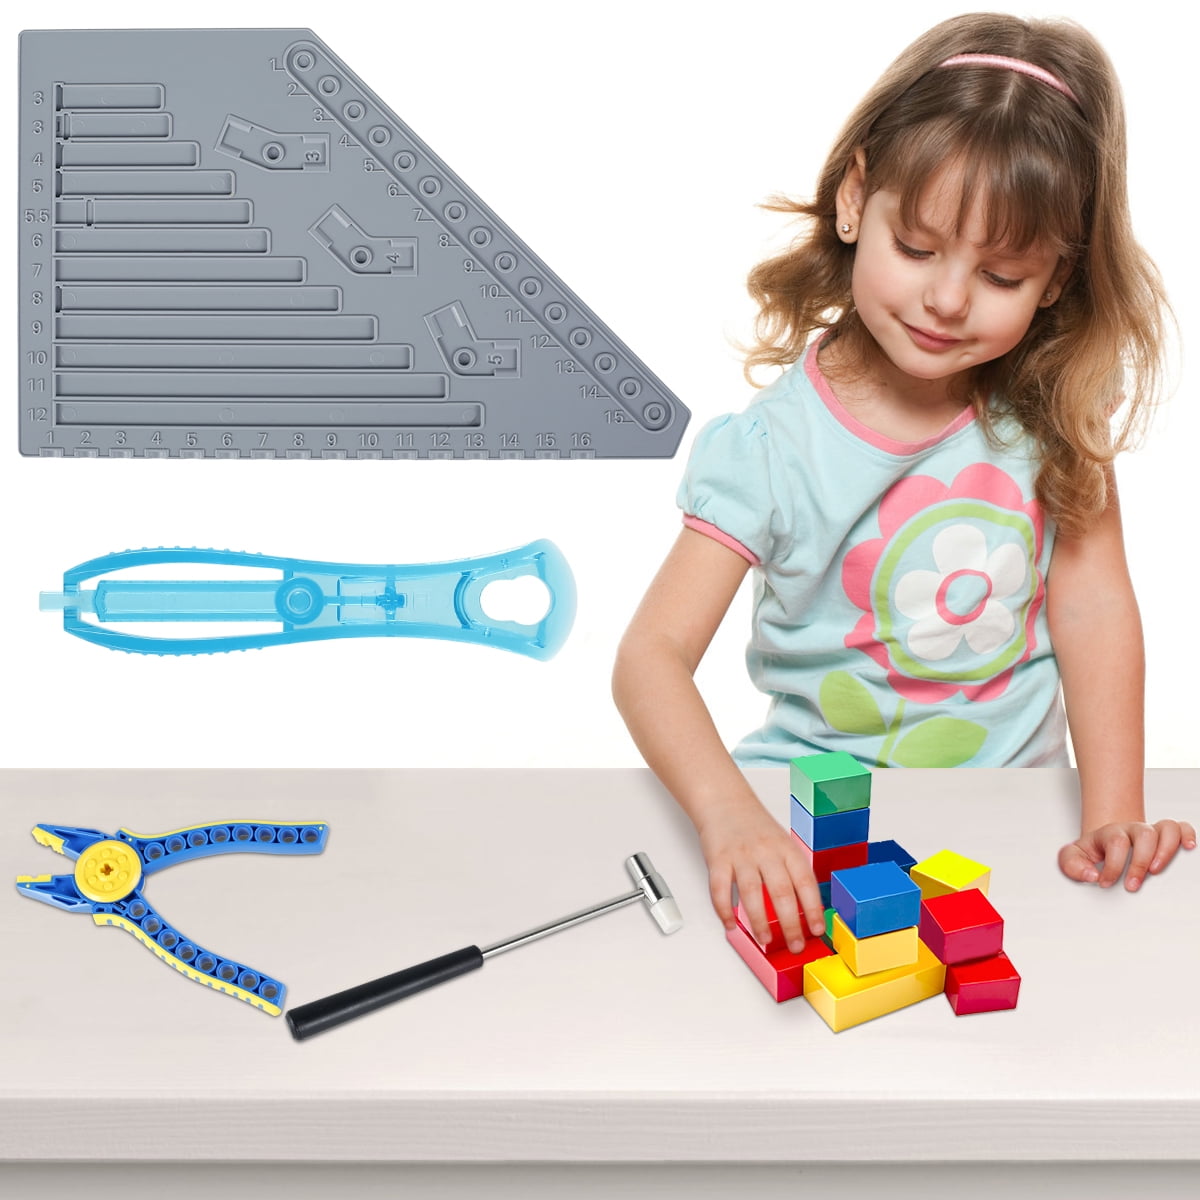  Ulanlan Separator Tools Compatible with Lego Blocks and  Technic, Building Block Tool Kit, Including 1 Multi use Hammer,1 Blocks  Pliers, 1 Clip and 2 Brick Separator : Toys & Games